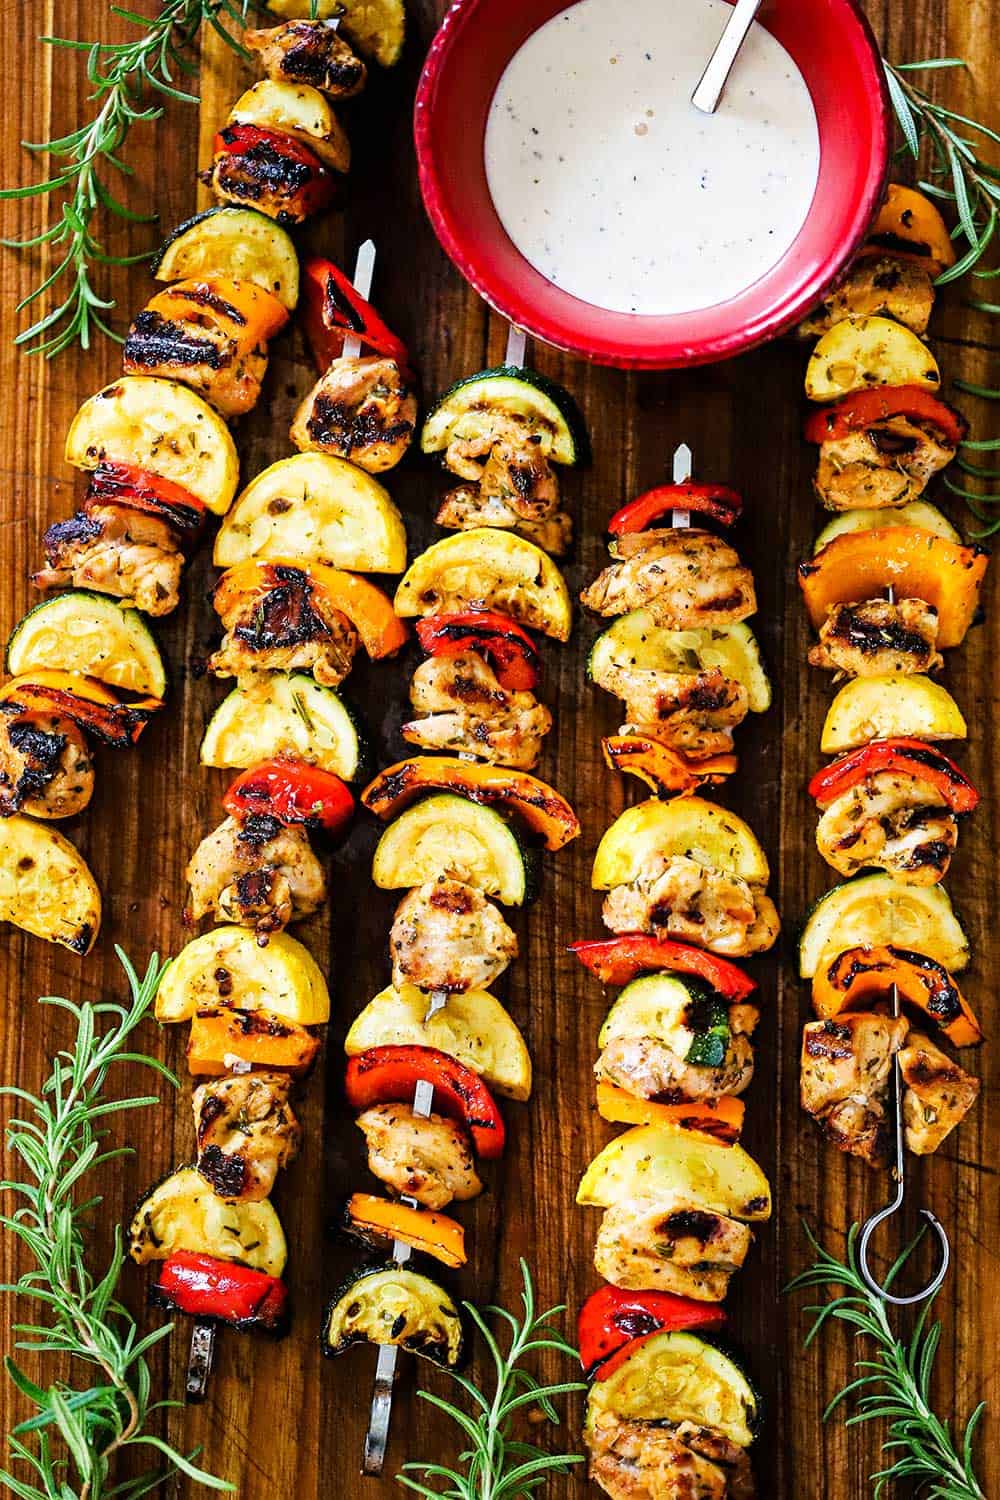 Five grilled chicken kabobs on metal skewers lined with vegetables and a red bowl of white BBQ sauce nearby.